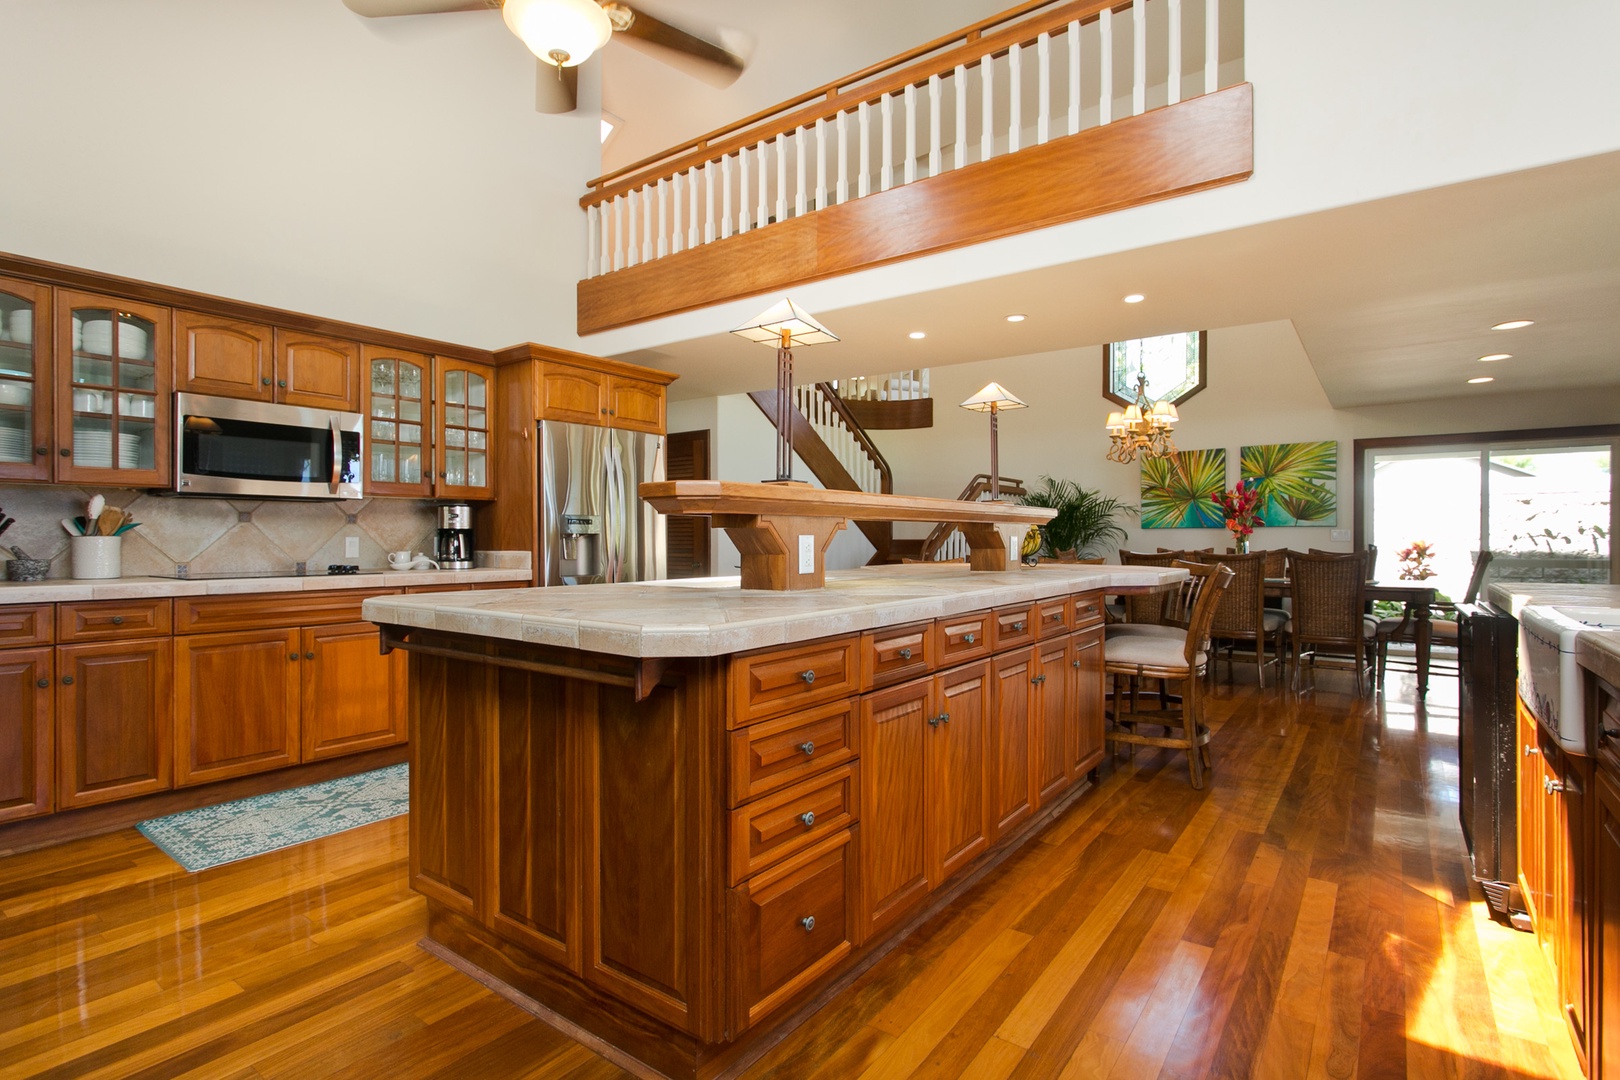 Kailua Vacation Rentals, Lanikai Village* - Hale Melia: Craft your favorite dishes in our gourmet kitchen designed with rich wood finishes and ample space.